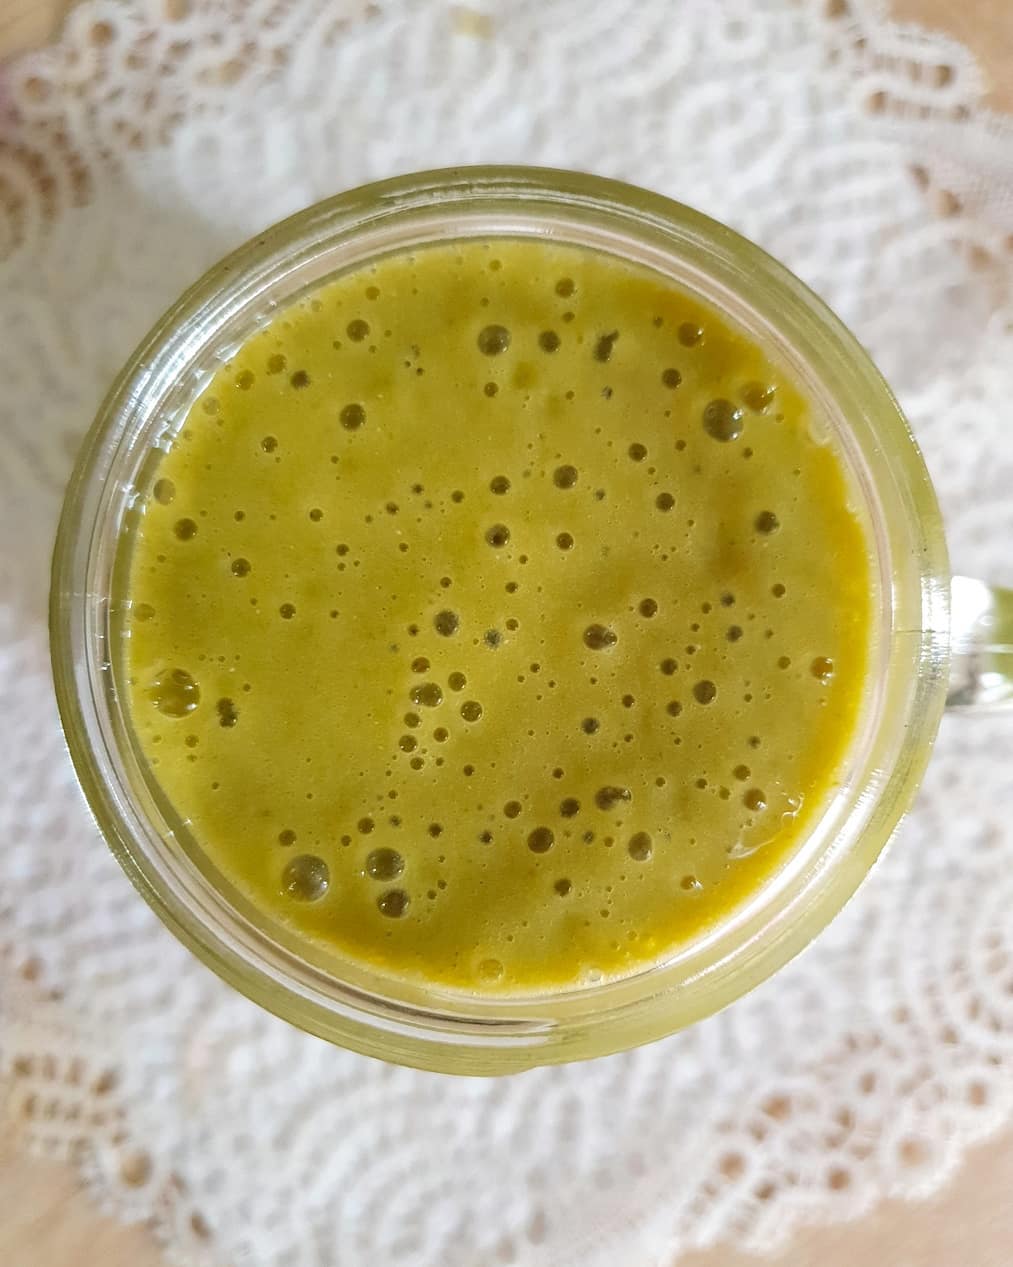 Throw-everything-in-it smoothie